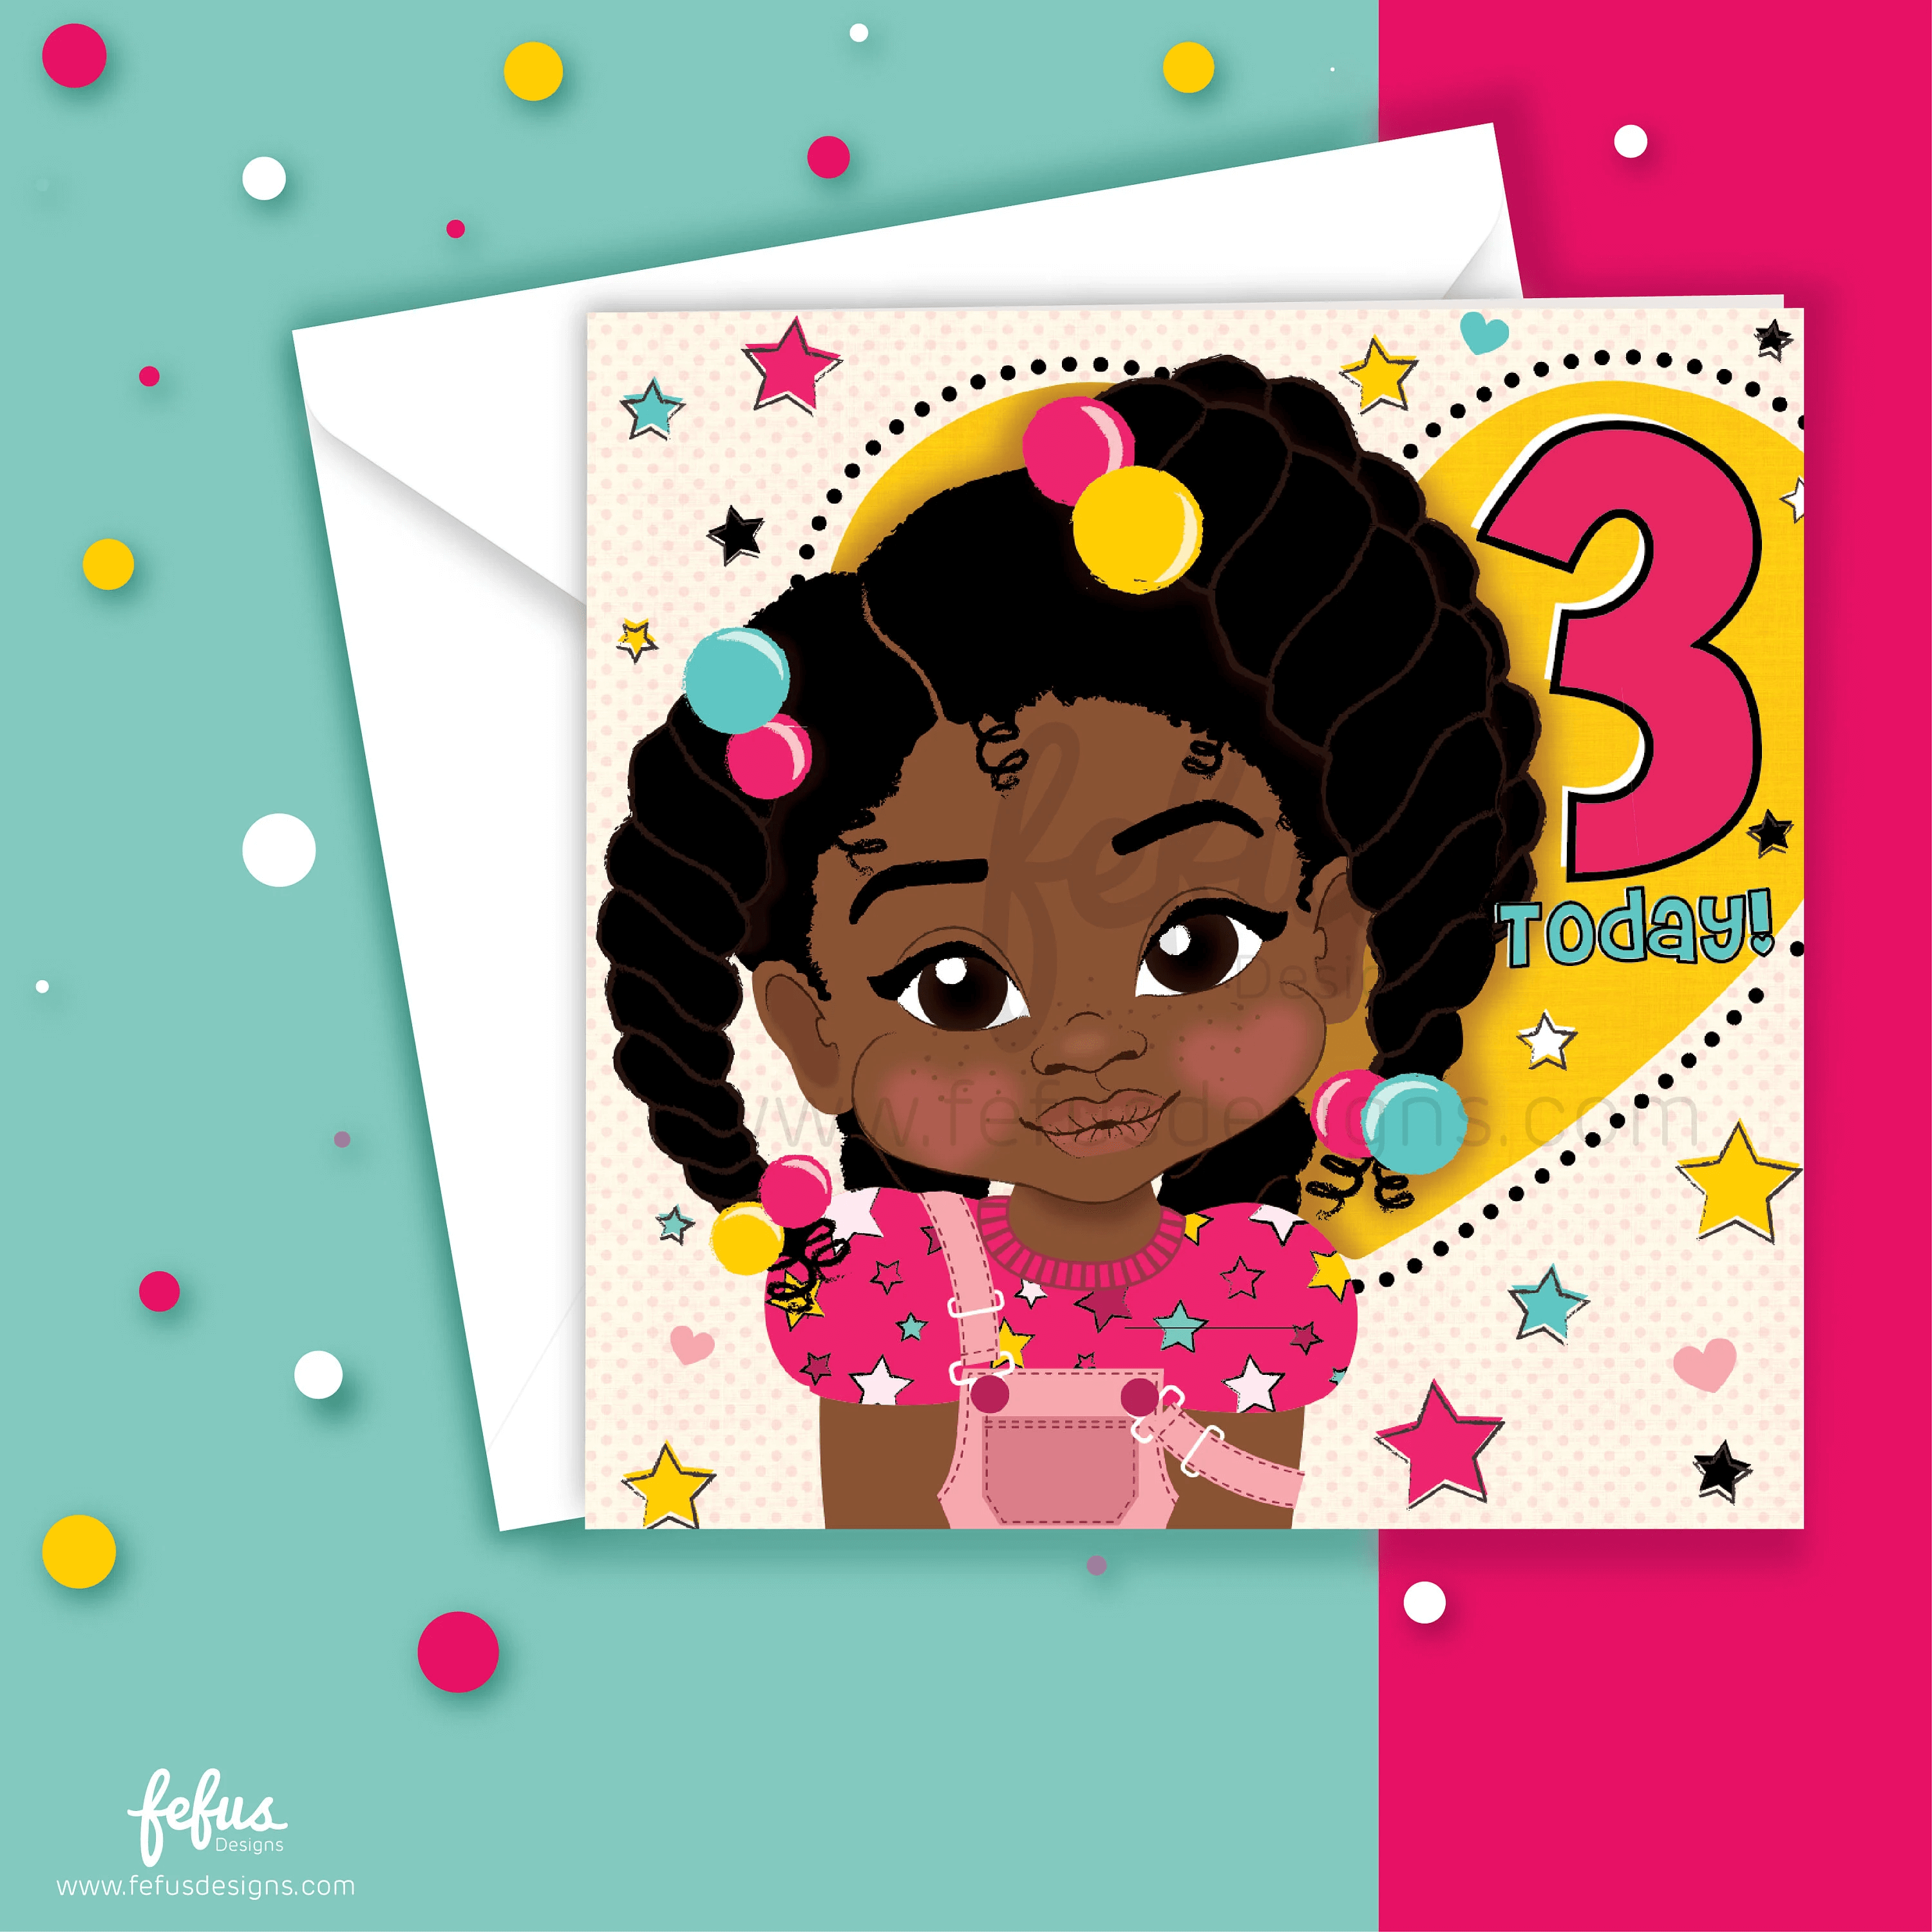 Adorable Black Girl with Colorful Bubbles in Afro Hair, Wearing Pink Star-Patterned Top and Light Pink Dungarees. Three Chunky Twists Accentuate Her Afro. Background Features a Yellow Heart with Pink '3', Blue 'Today' text, and Colorful Stars. Celebrate Black Girl Magic with Fefus Designs' 3rd Birthday Card!